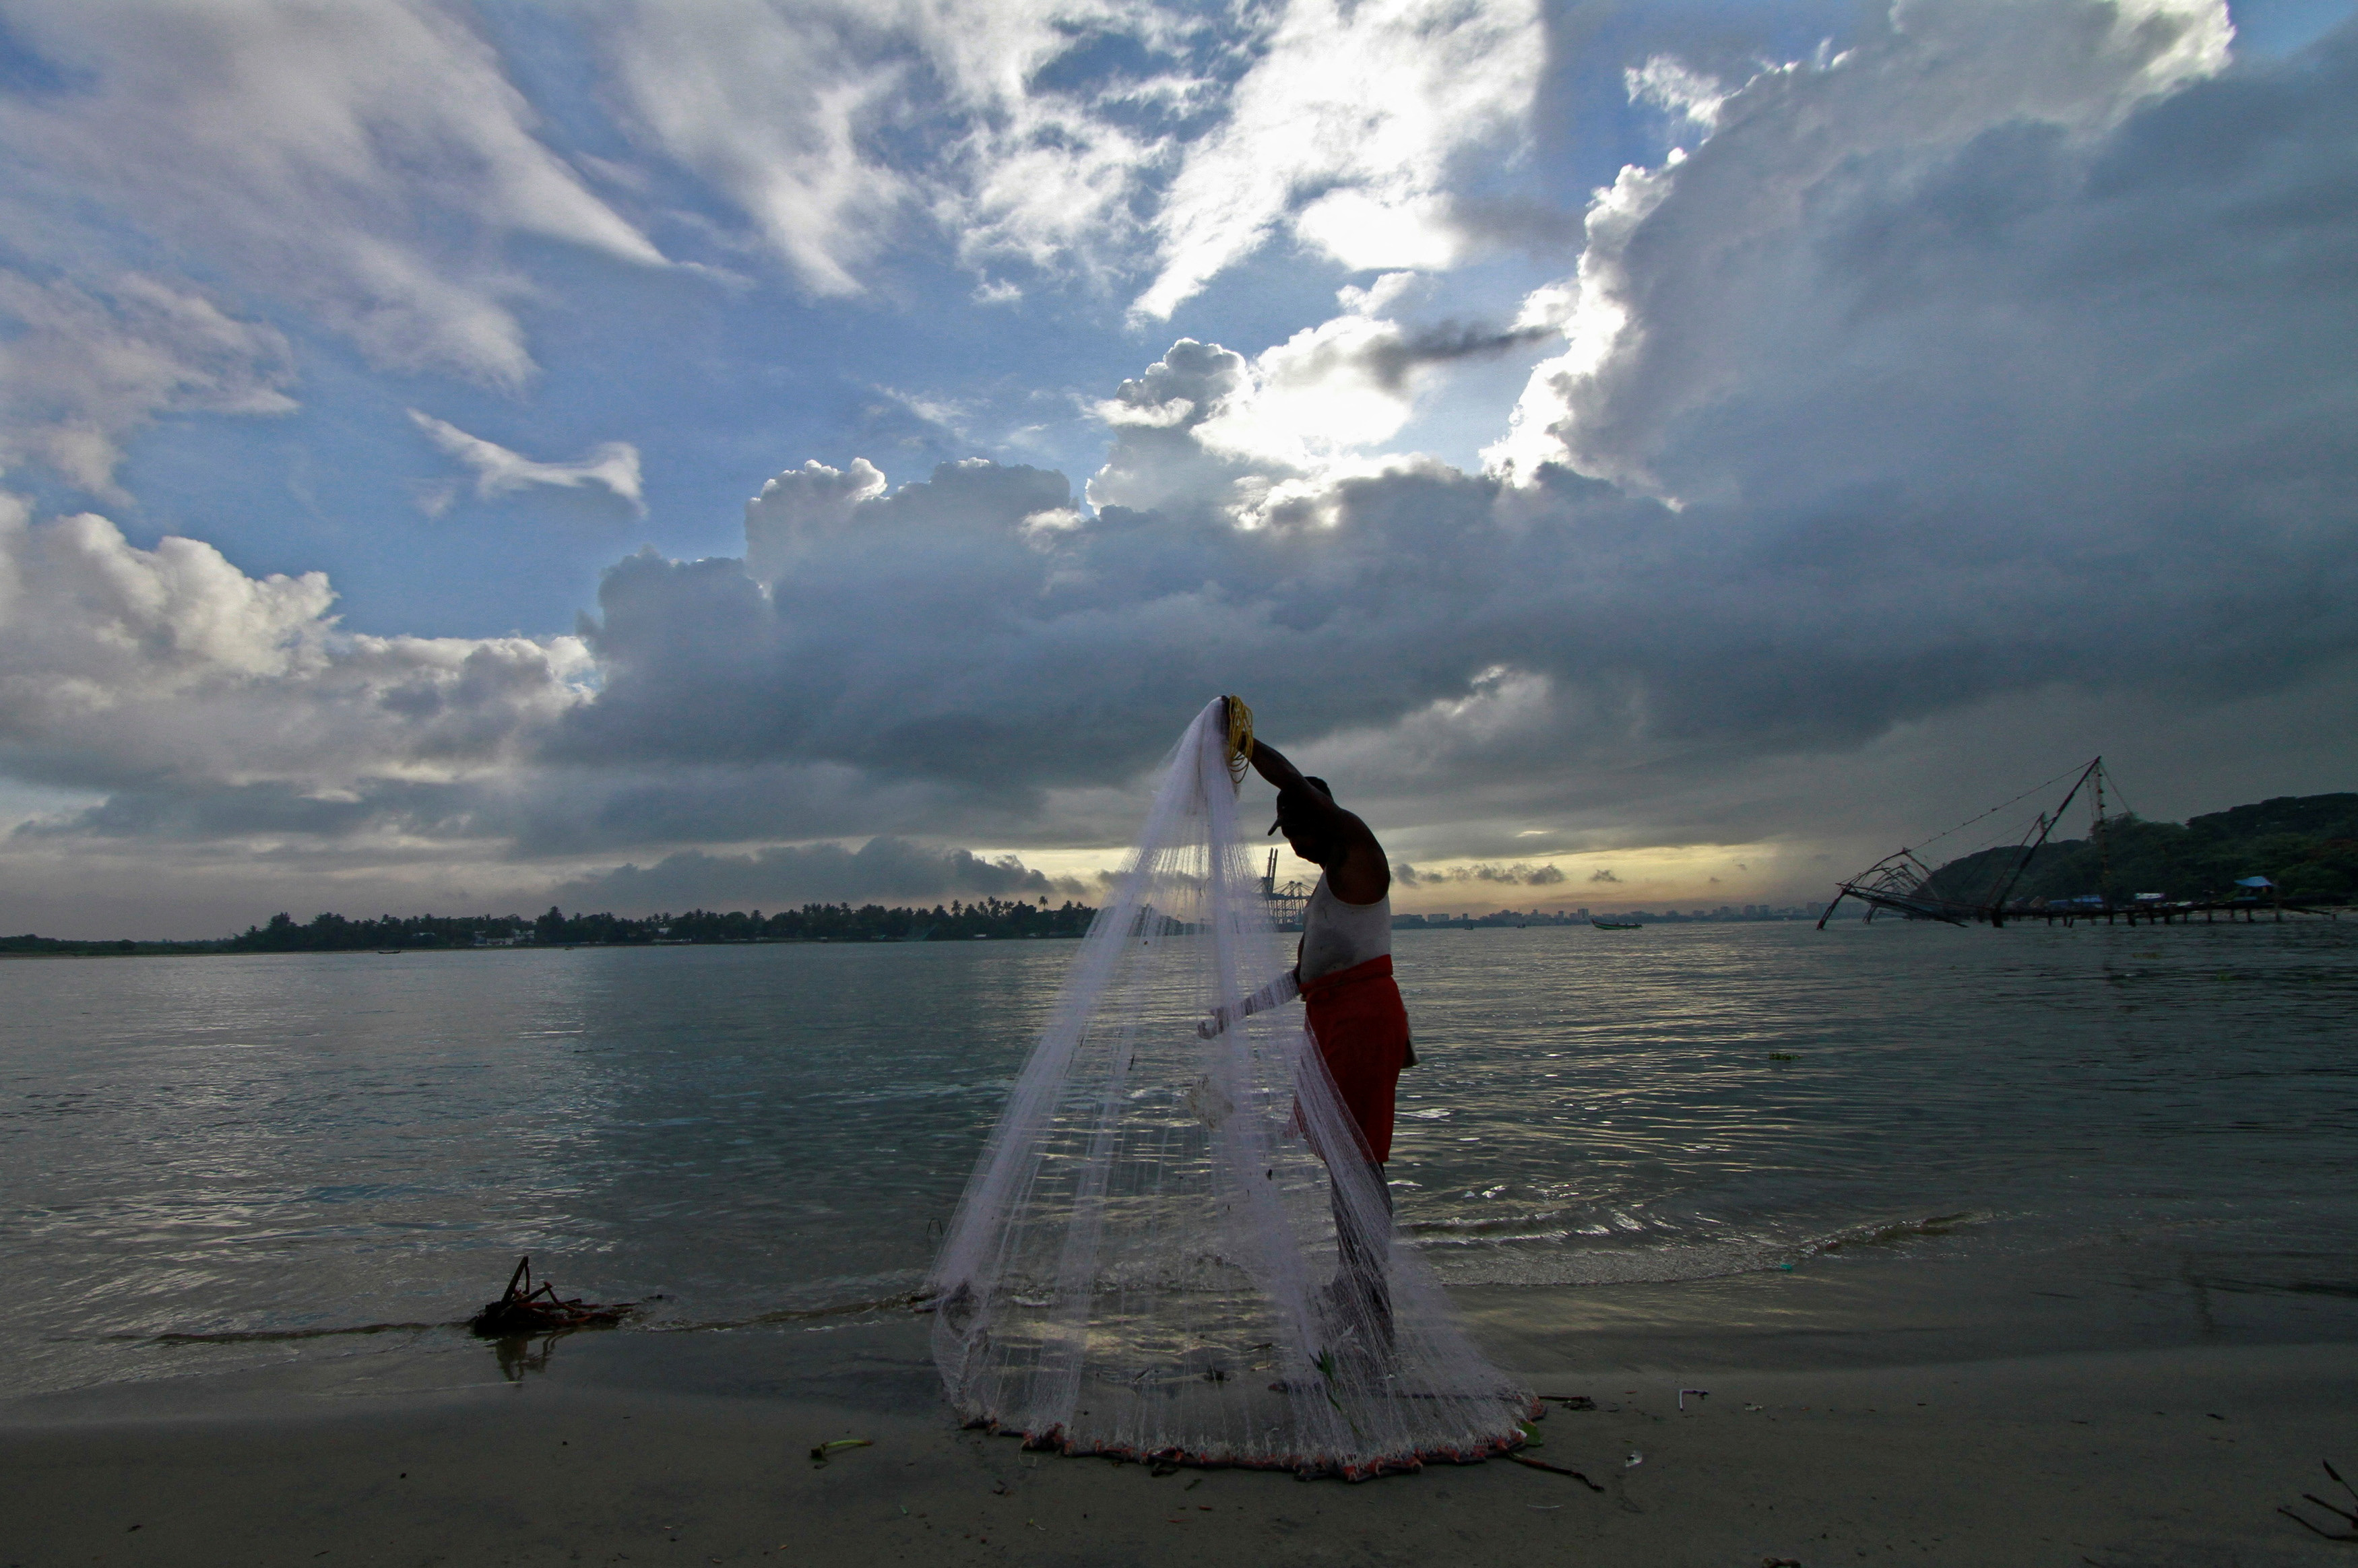 A fisherman arranges his fishing net at a beach against the backdrop of pre-monsoon clouds in Kochi